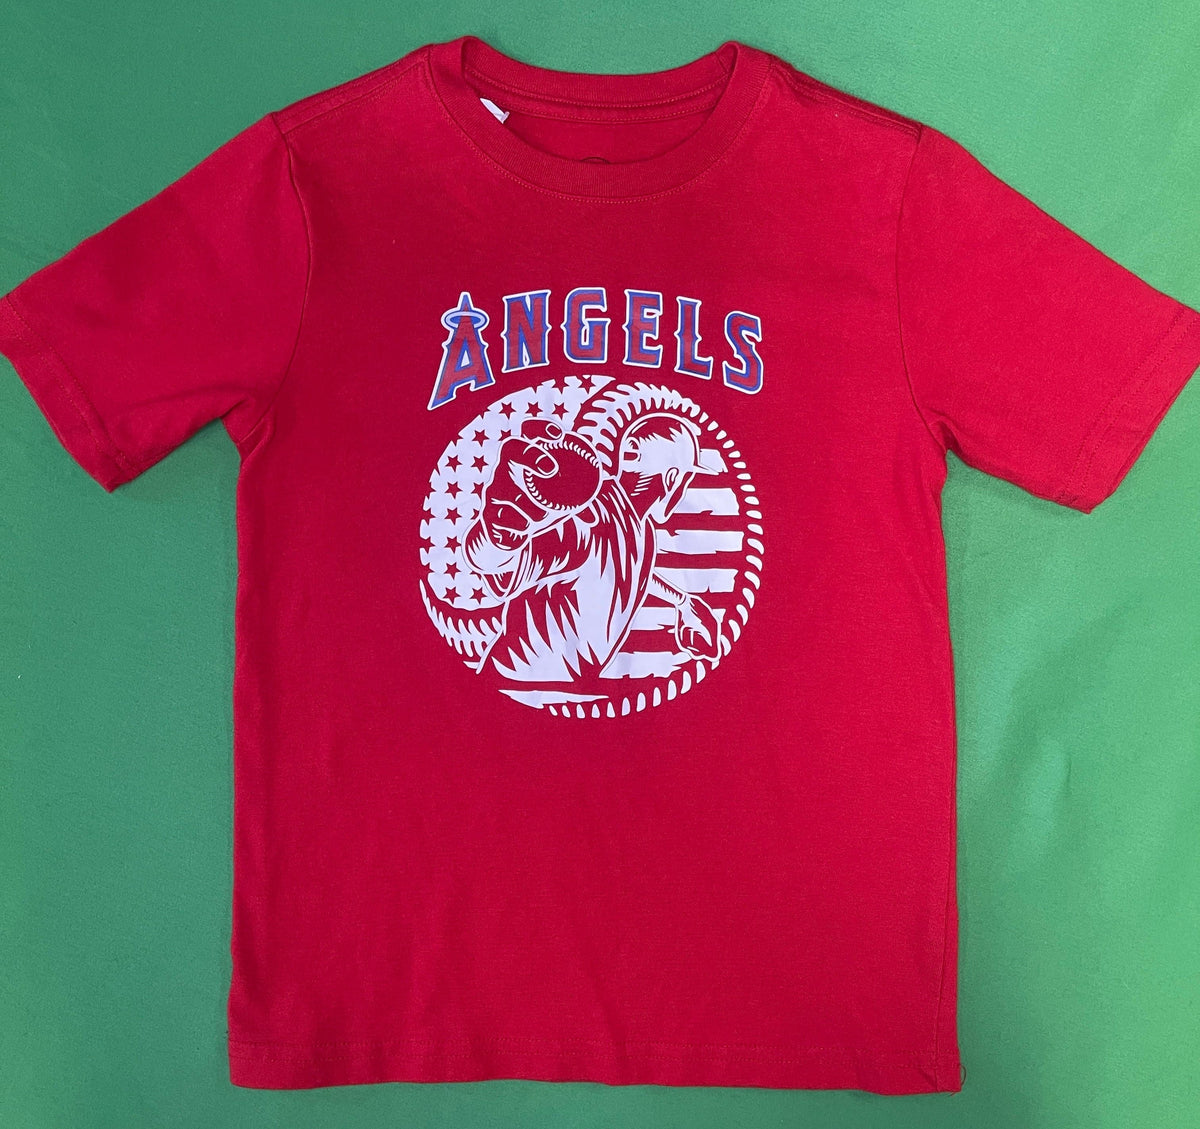 MLB Los Angeles Angels Bright Red T-Shirt Youth Small 6-7